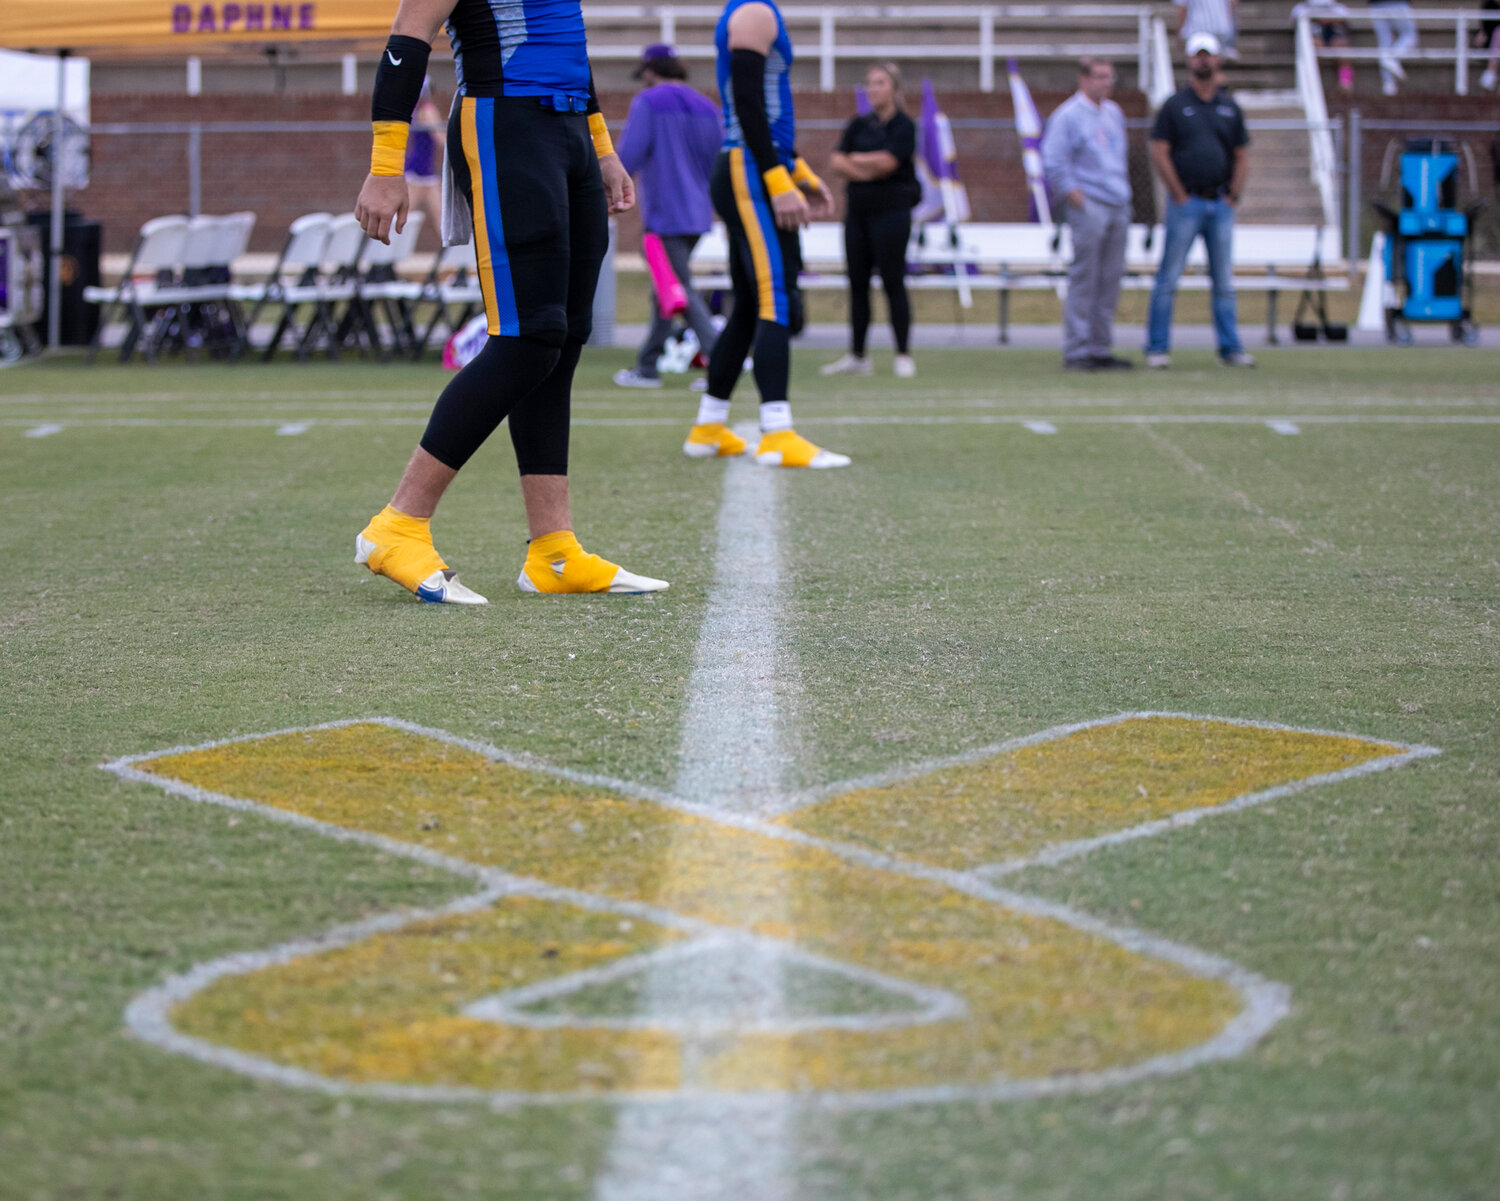 W.C. Majors Field at Fairhope Municipal Stadium was decorated with yellow ribbons for the 10th-annual Spina Bifida Awareness Game on Friday, Oct. 13. The event celebrated its tin anniversary by surpassing its fundraising goal of $10,000.